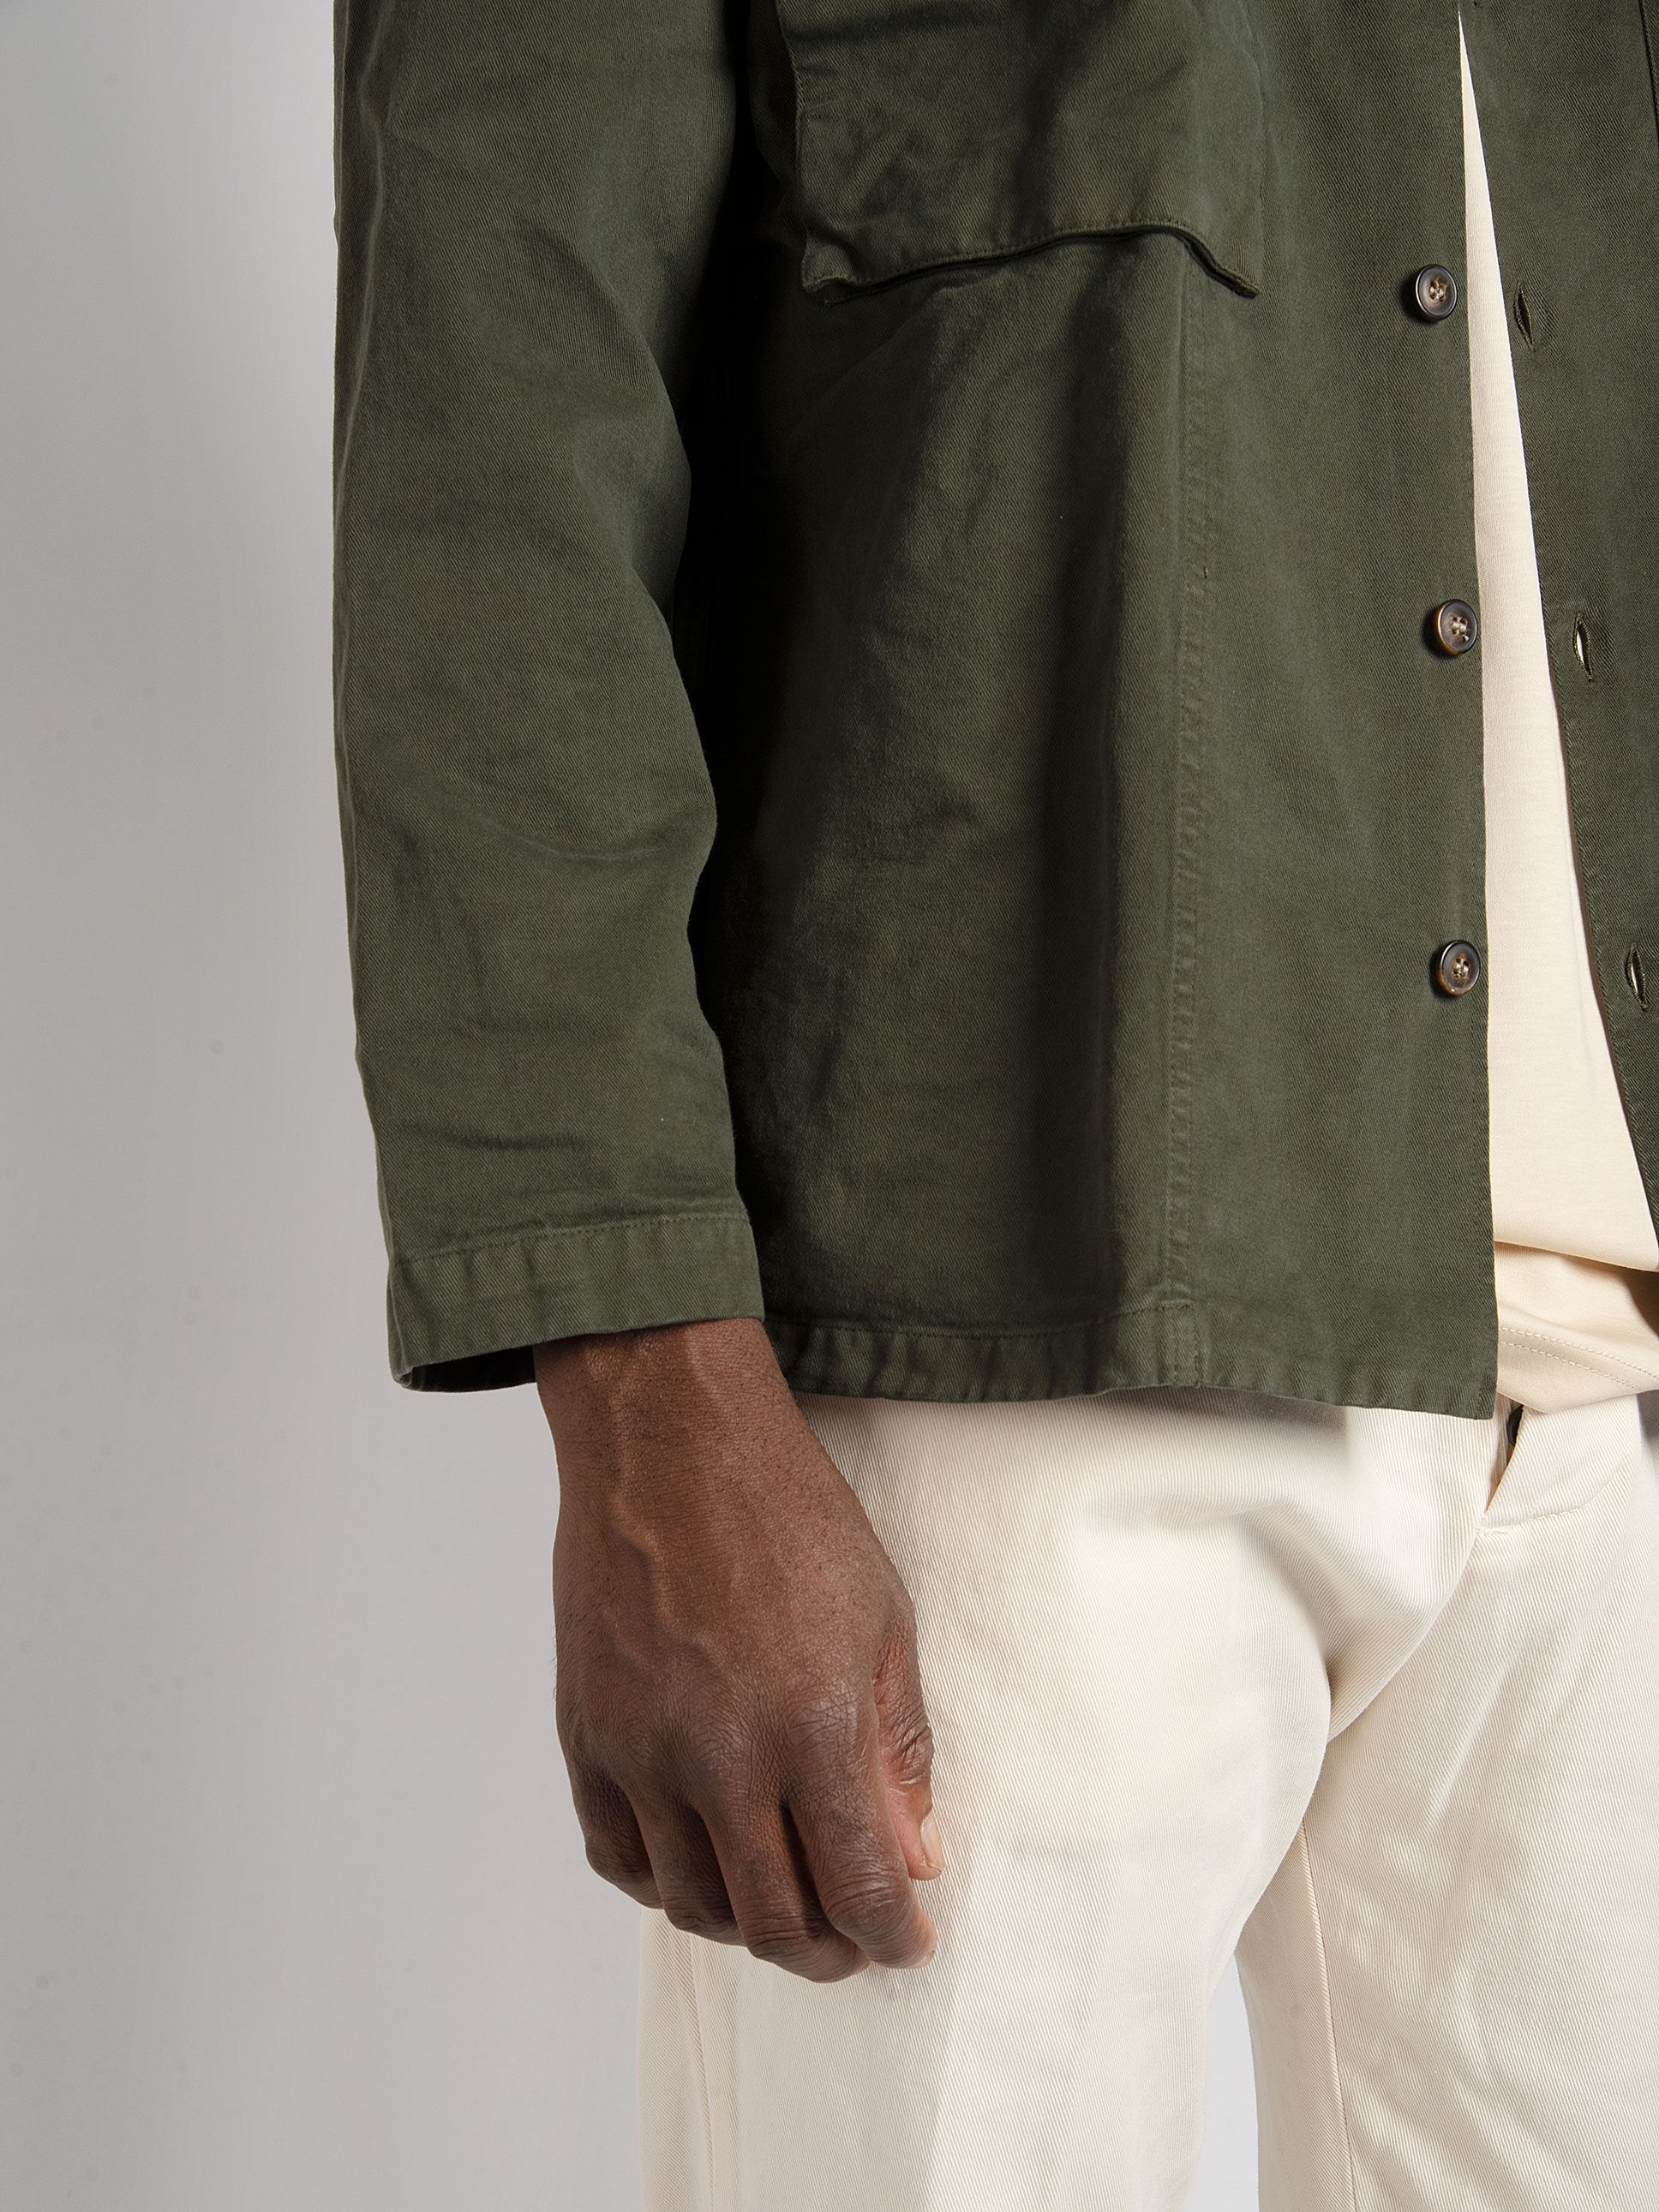 Over Shirt 'Pacific' - Verde Militare